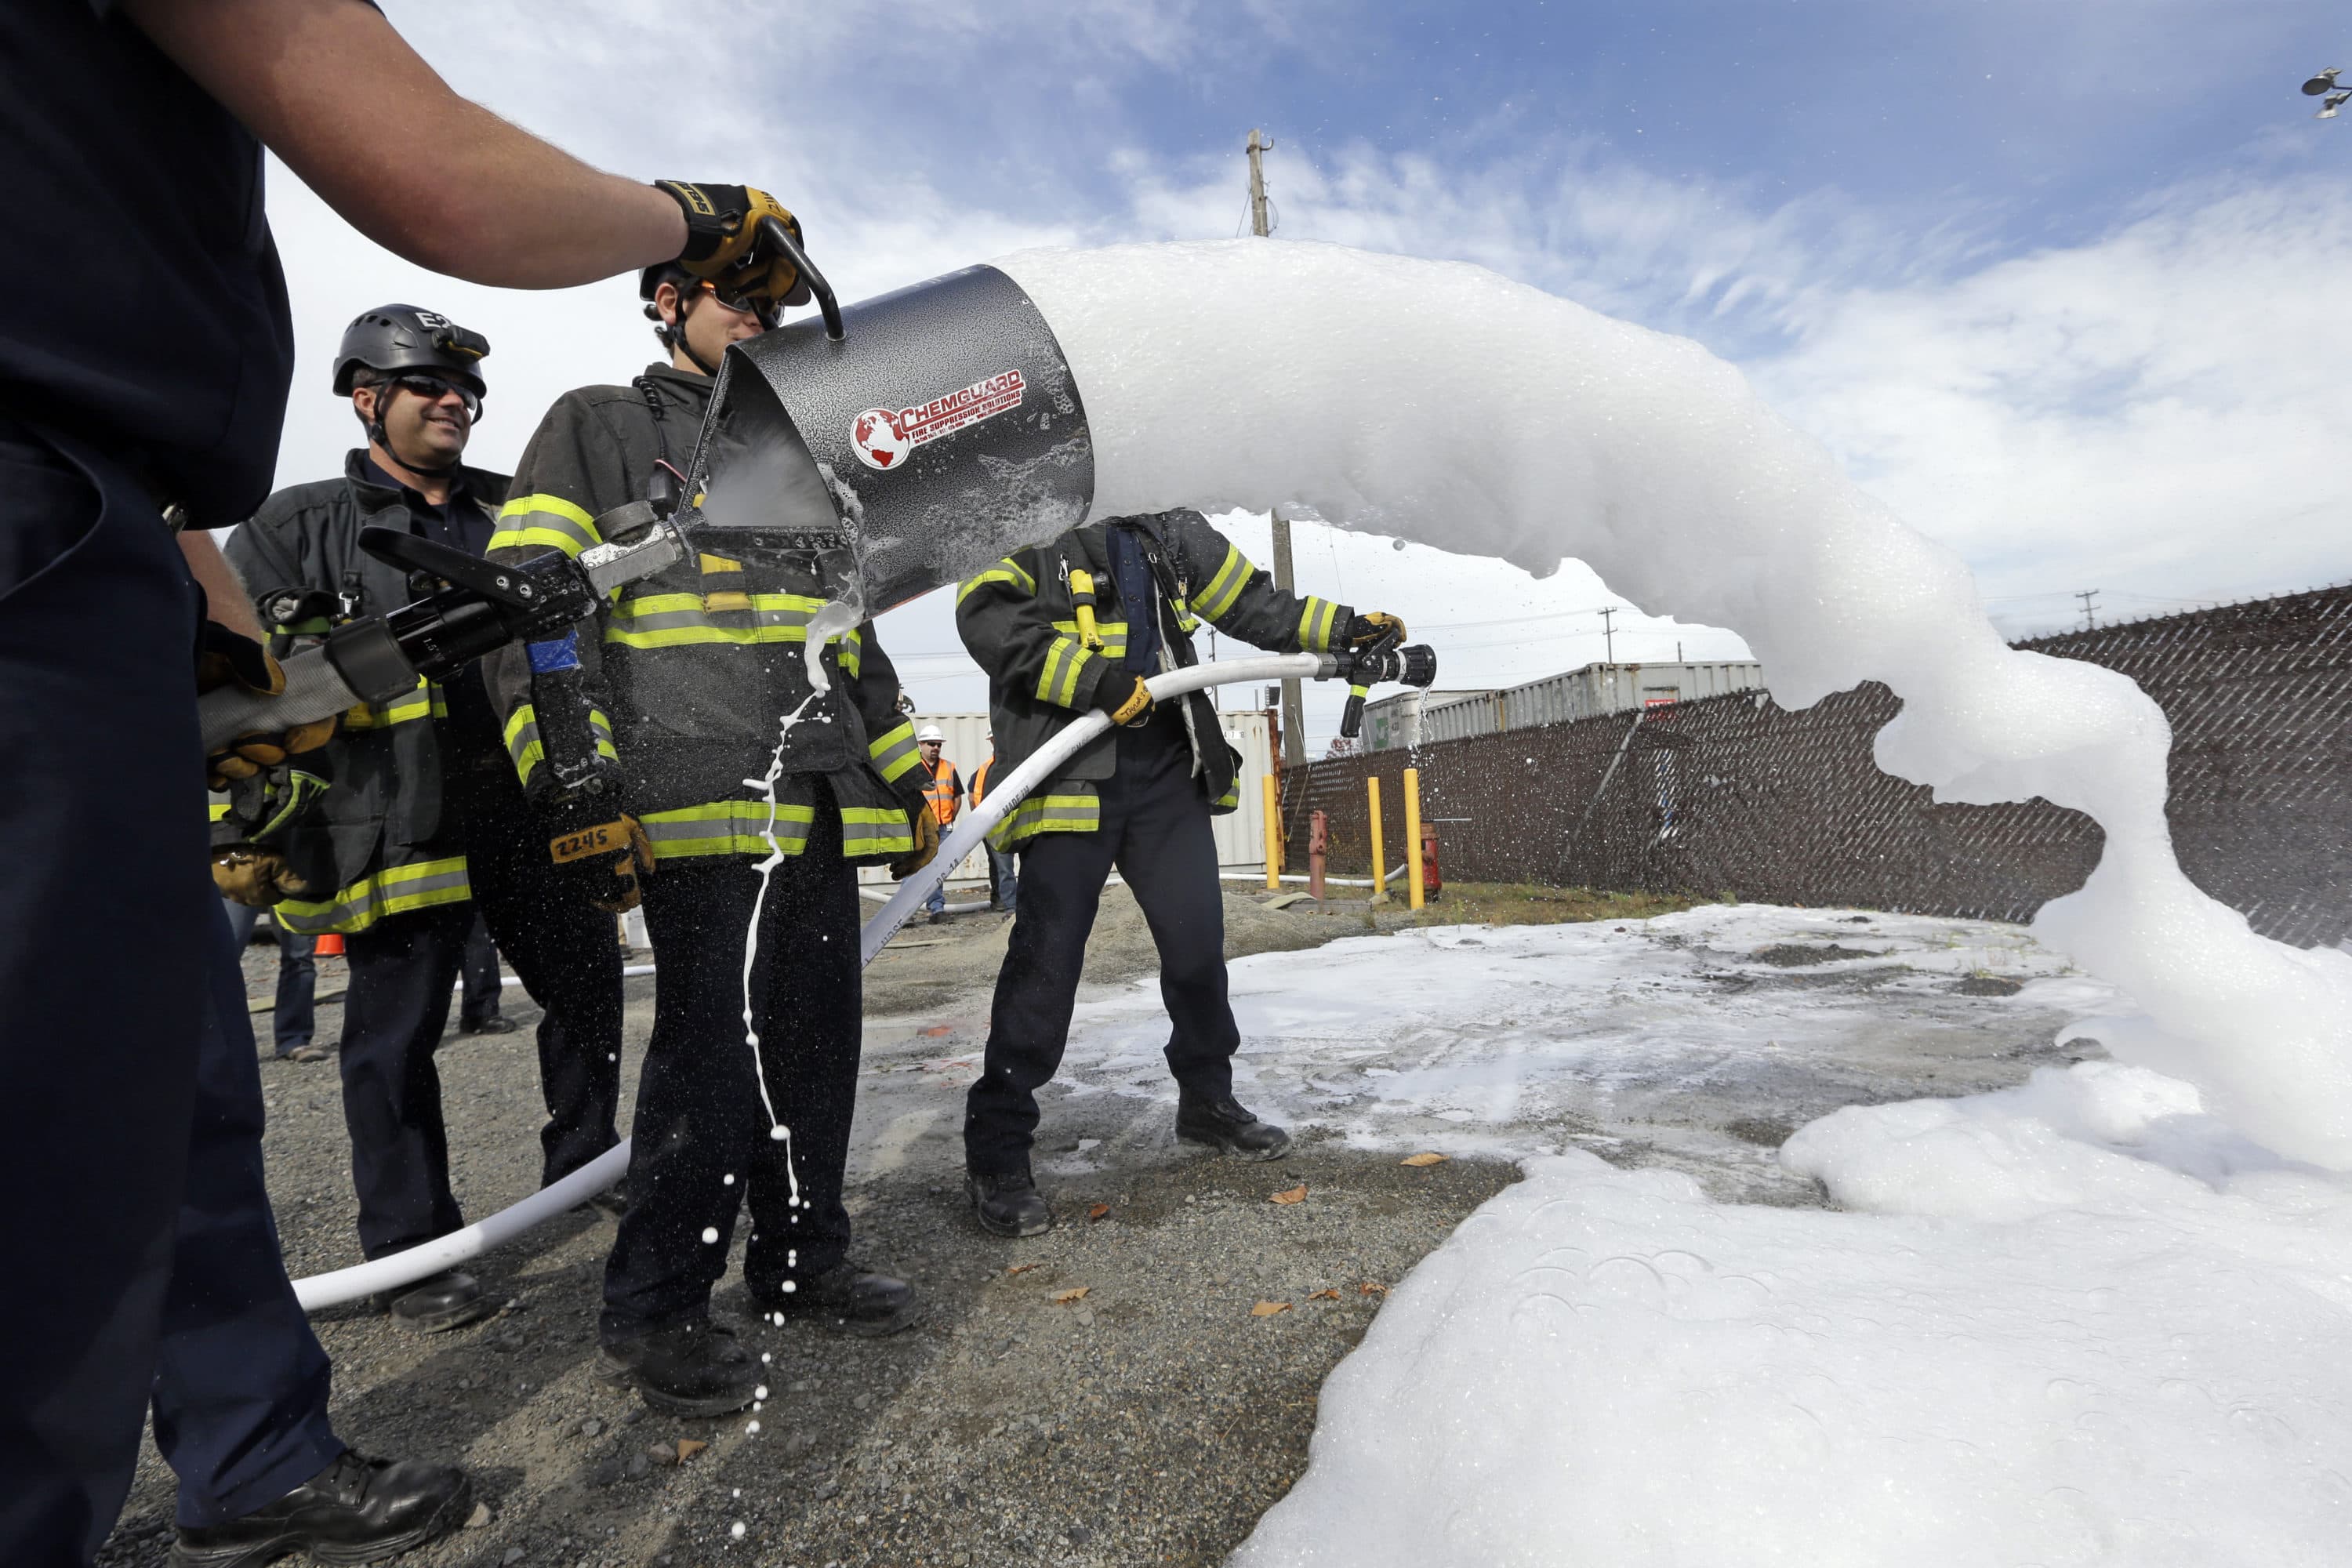 Firefighting foams like this one often contain PFAS chemicals. (Elaine Thompson/AP)